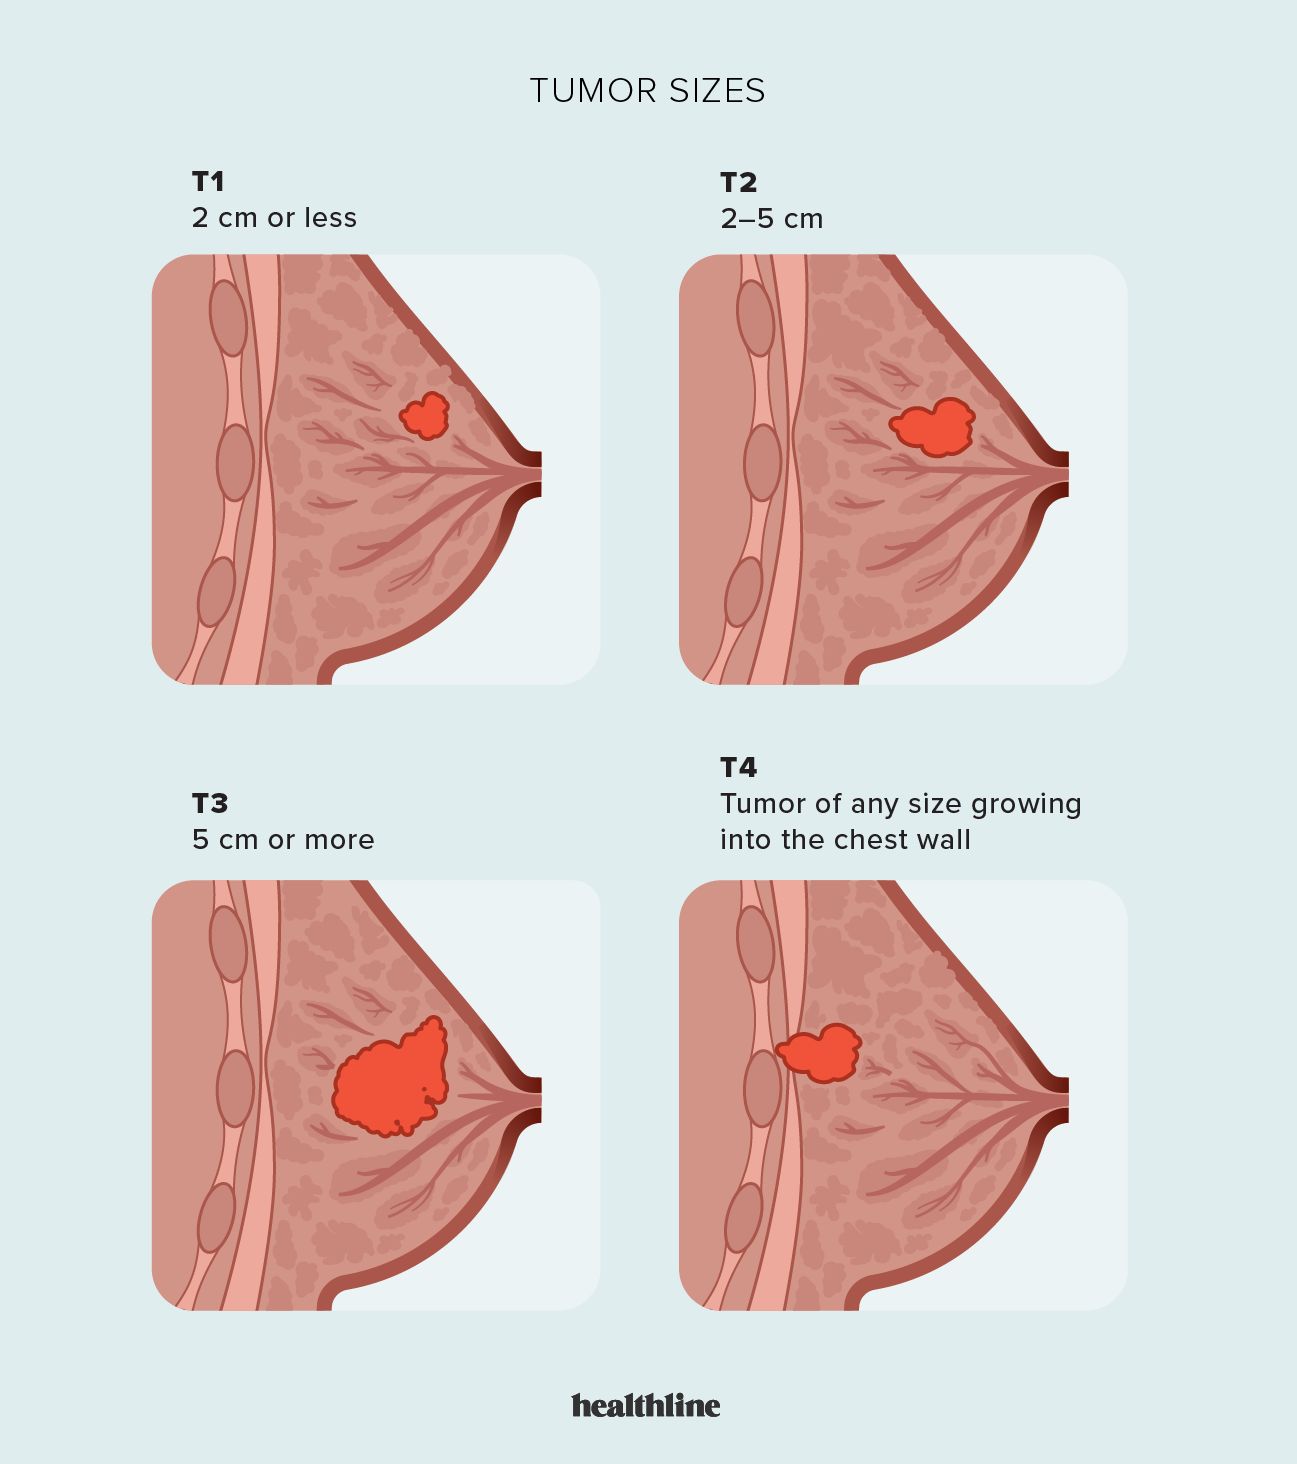 What Are the Symptoms and Signs of Breast Cancer?